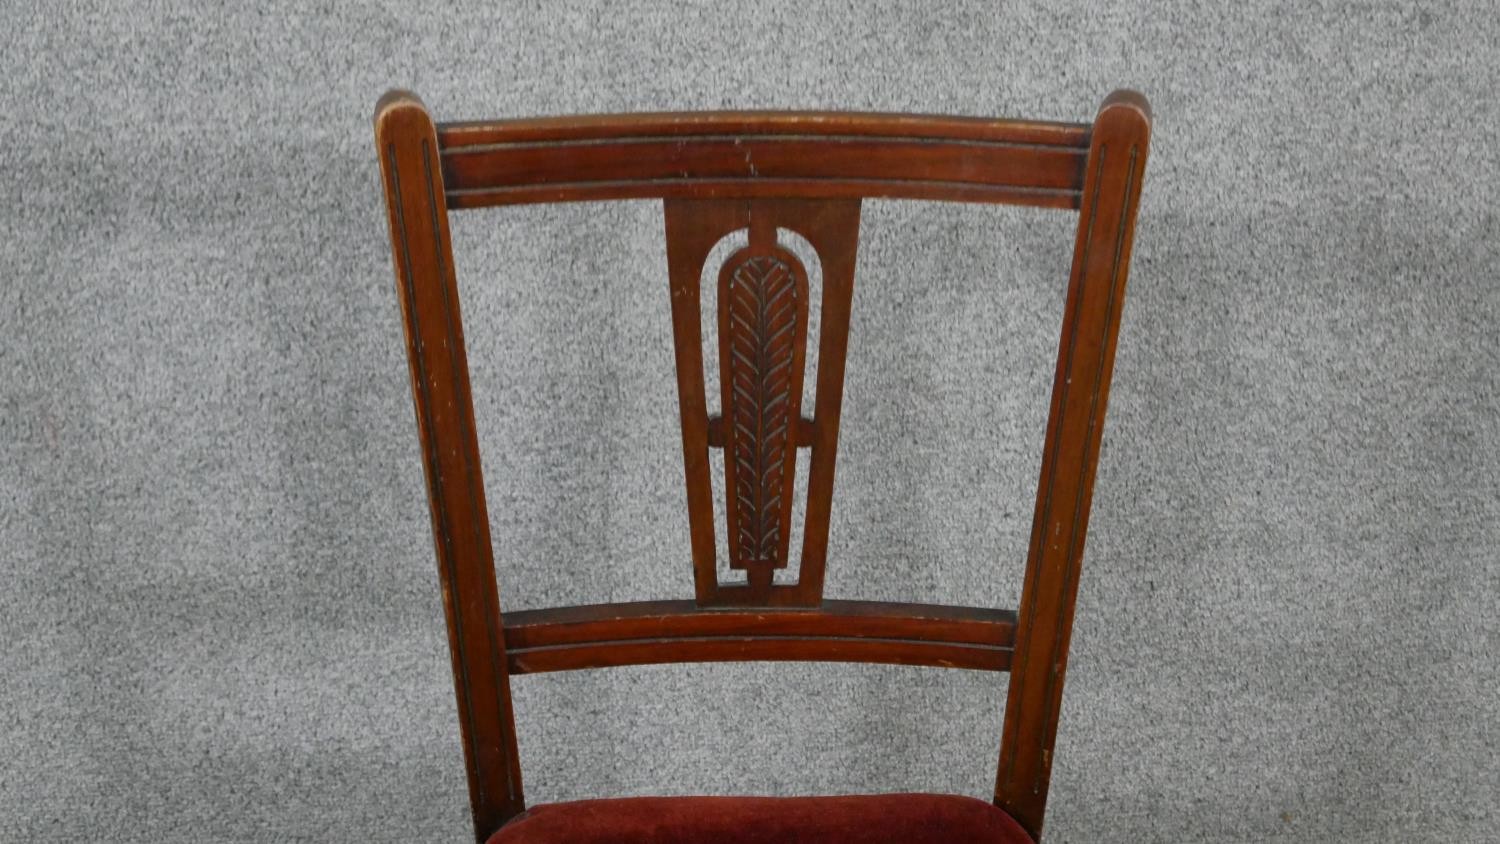 A pair of Edwardian walnut side chairs, the back with a carved foliate splat, over a red velour - Image 4 of 6